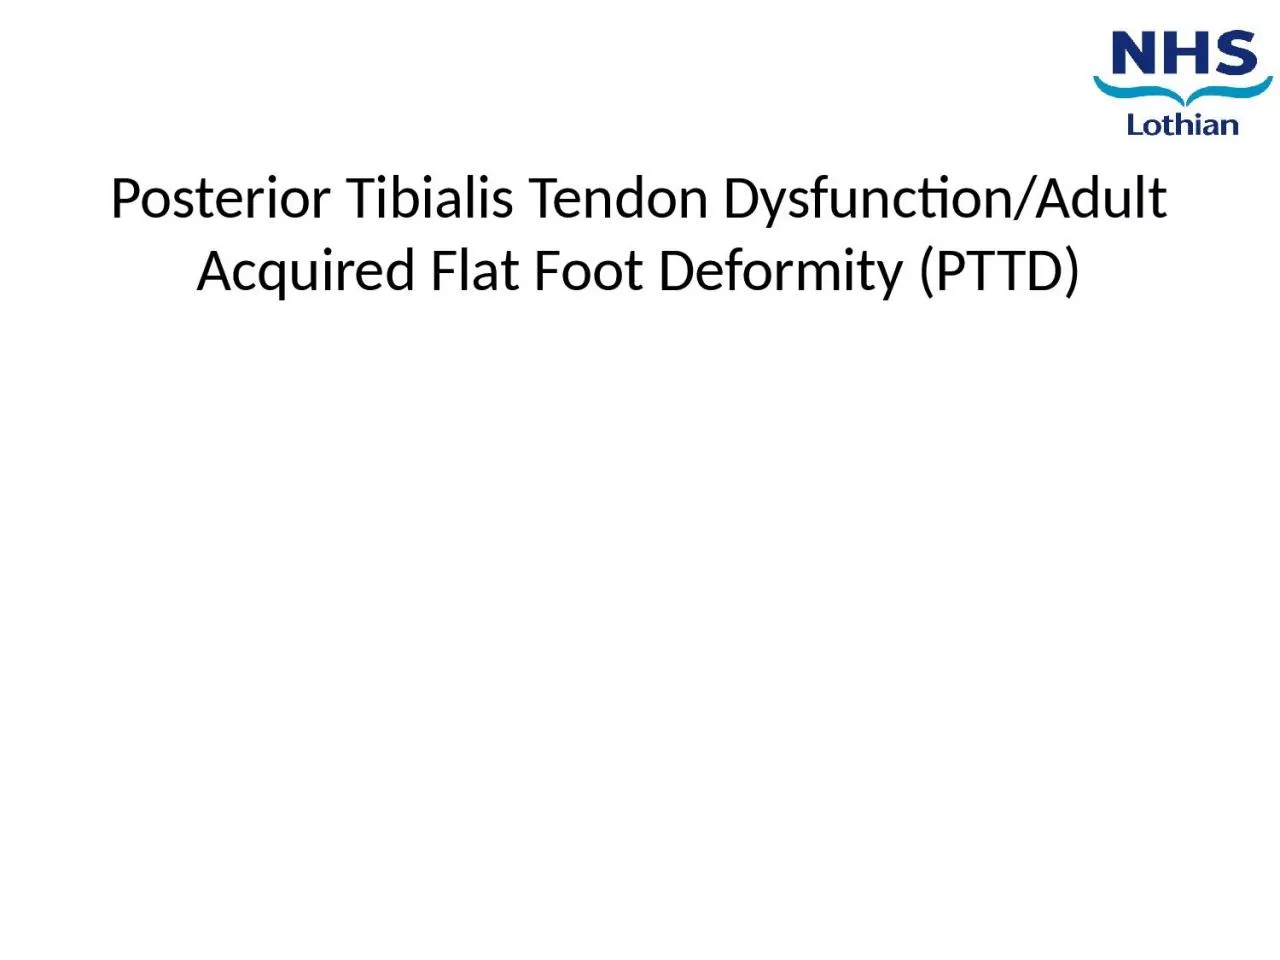 Posterior Tibialis Tendon Dysfunction/Adult Acquired Flat Foot Deformity (PTTD)